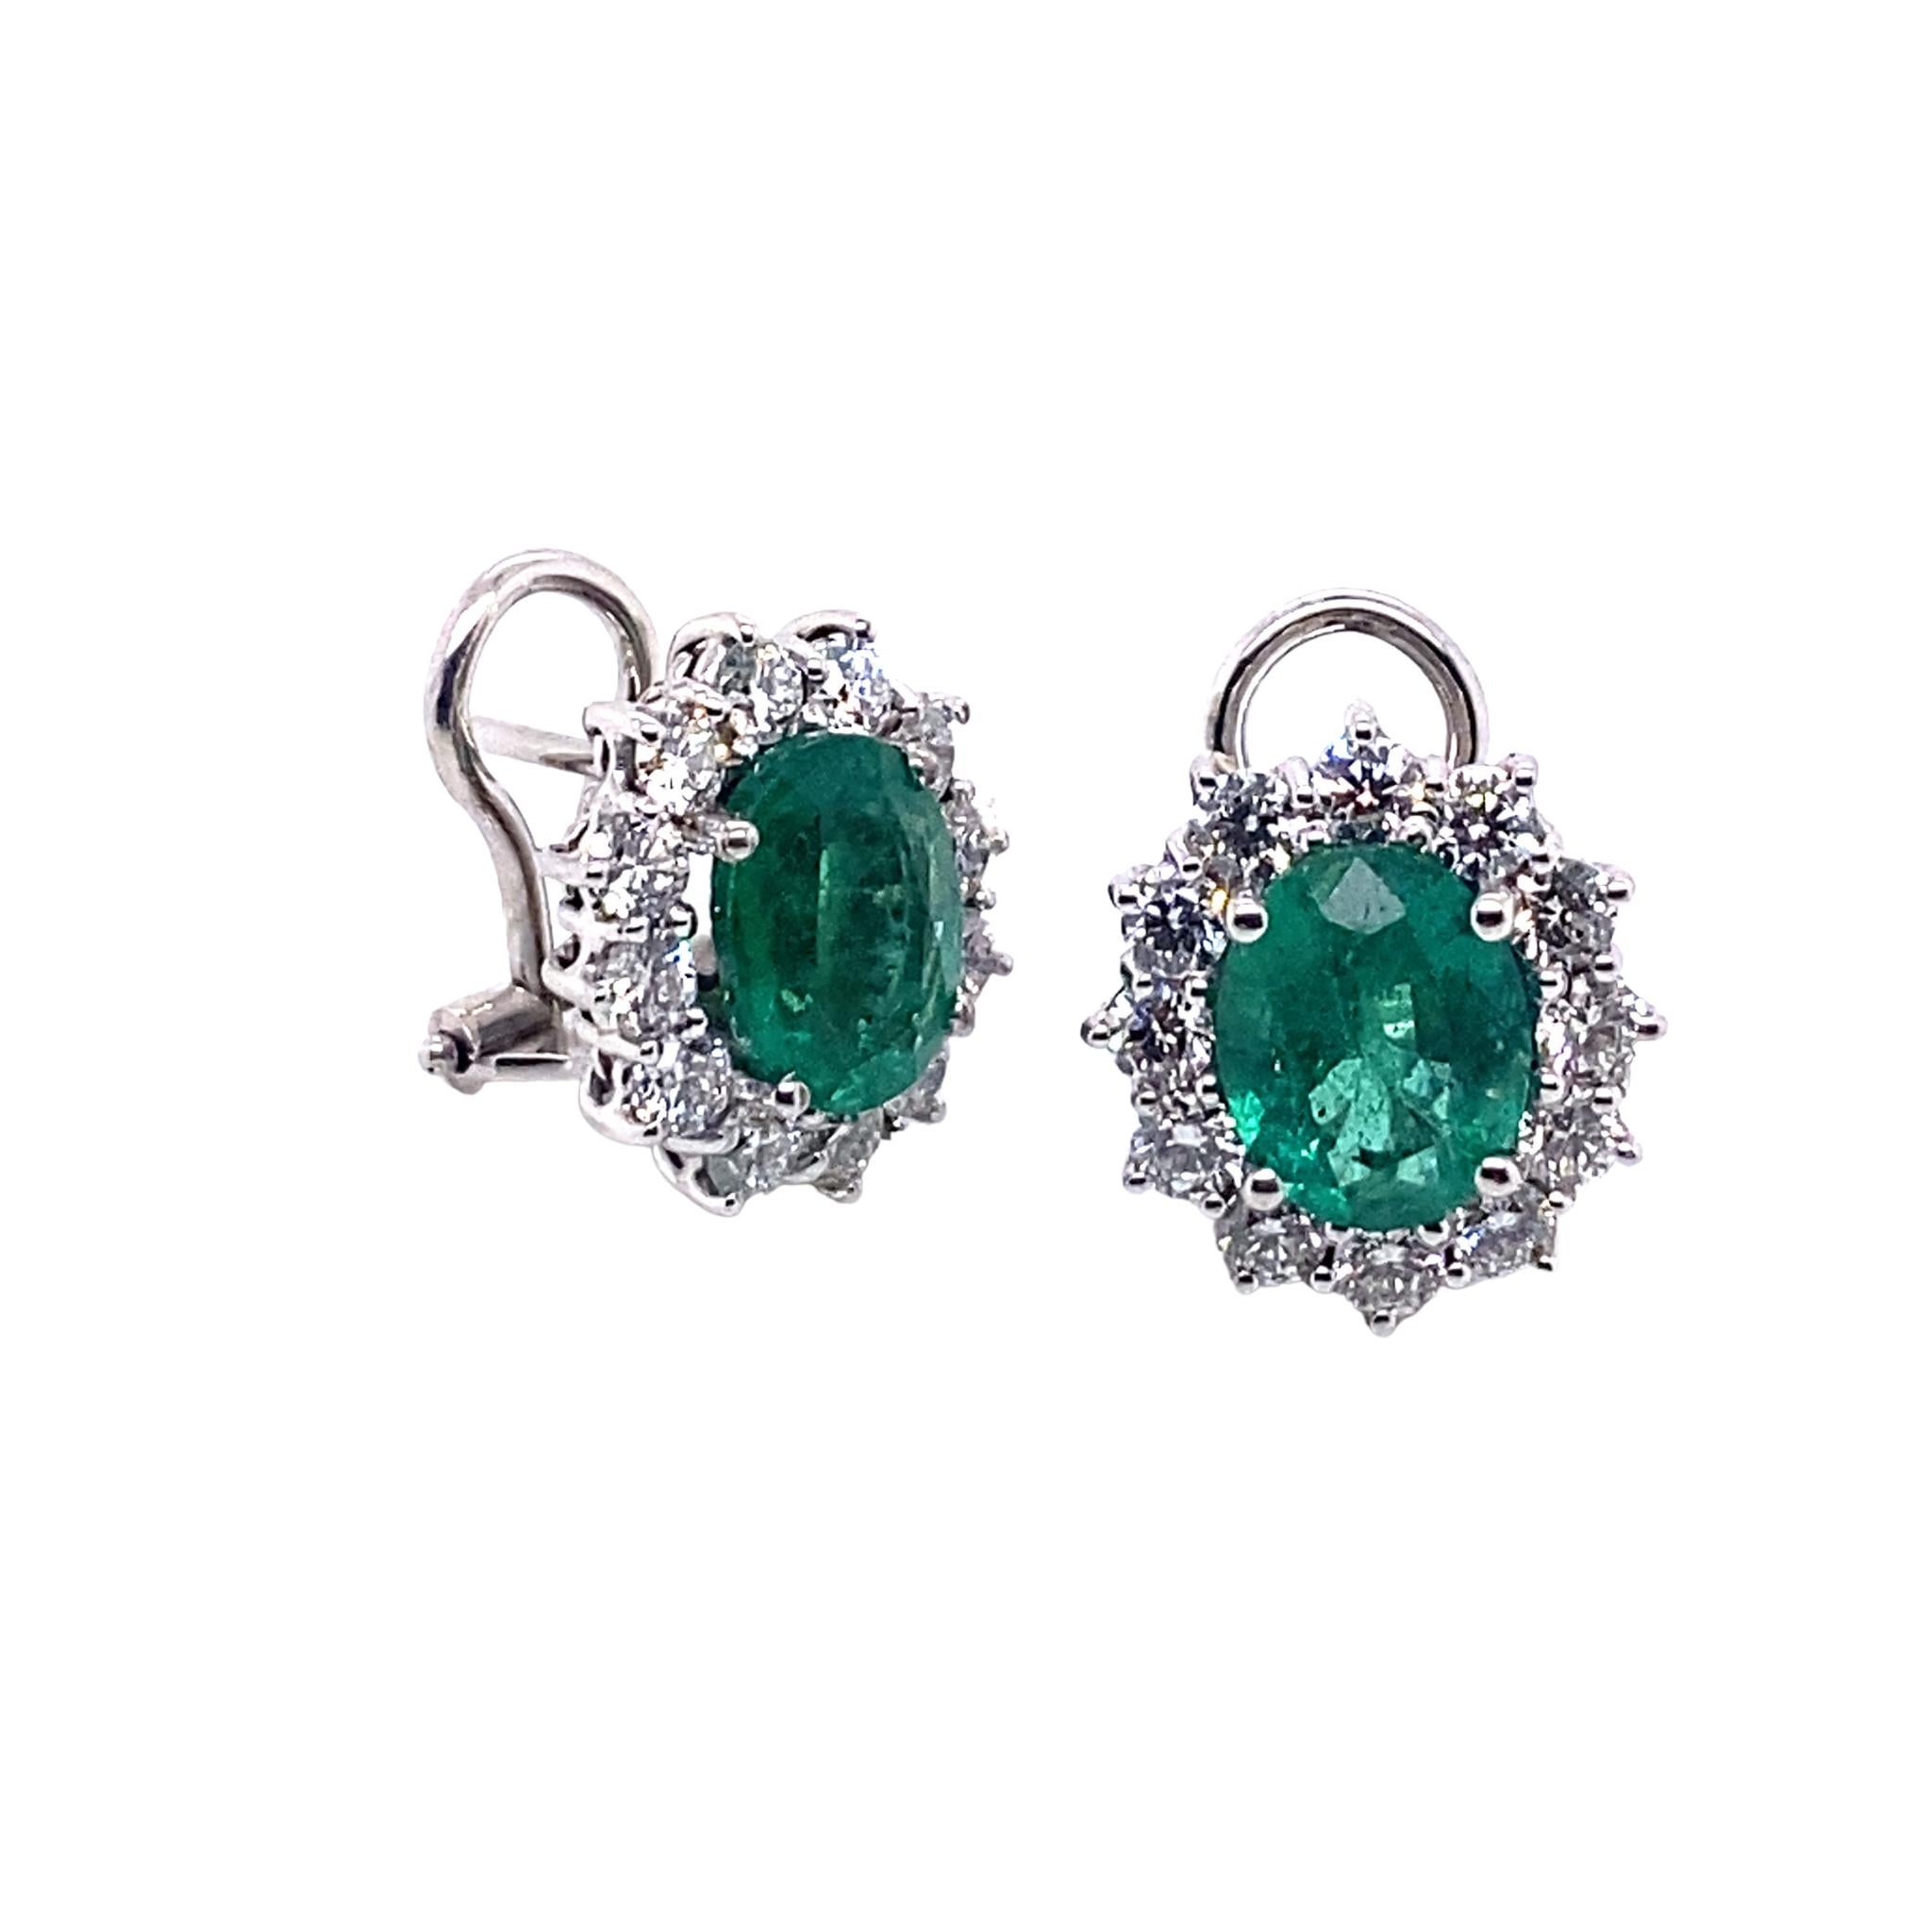 A vibrant pair of emerald and diamond earrings masterfully created by hand. Each earring features a single emerald surrounded by a frame of white, G-VS diamonds. The emeralds weigh a total of 3.54 carats and the diamonds weigh 1.52 carats. 

The